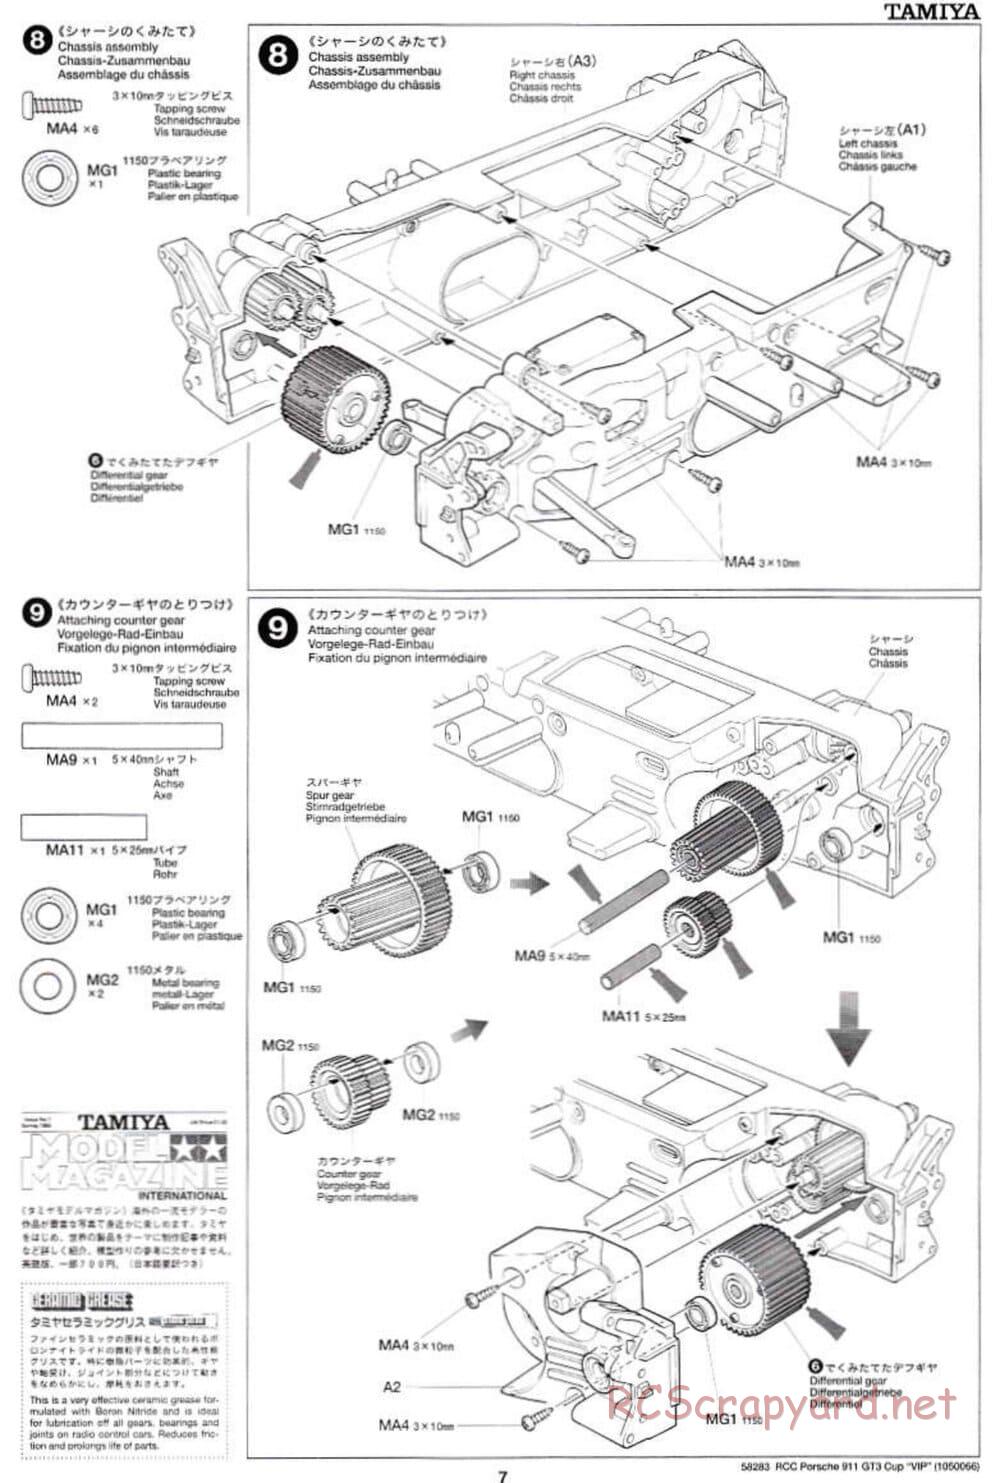 Tamiya - Porsche 911 GT3 Cup VIP - TL-01 Chassis - Manual - Page 7